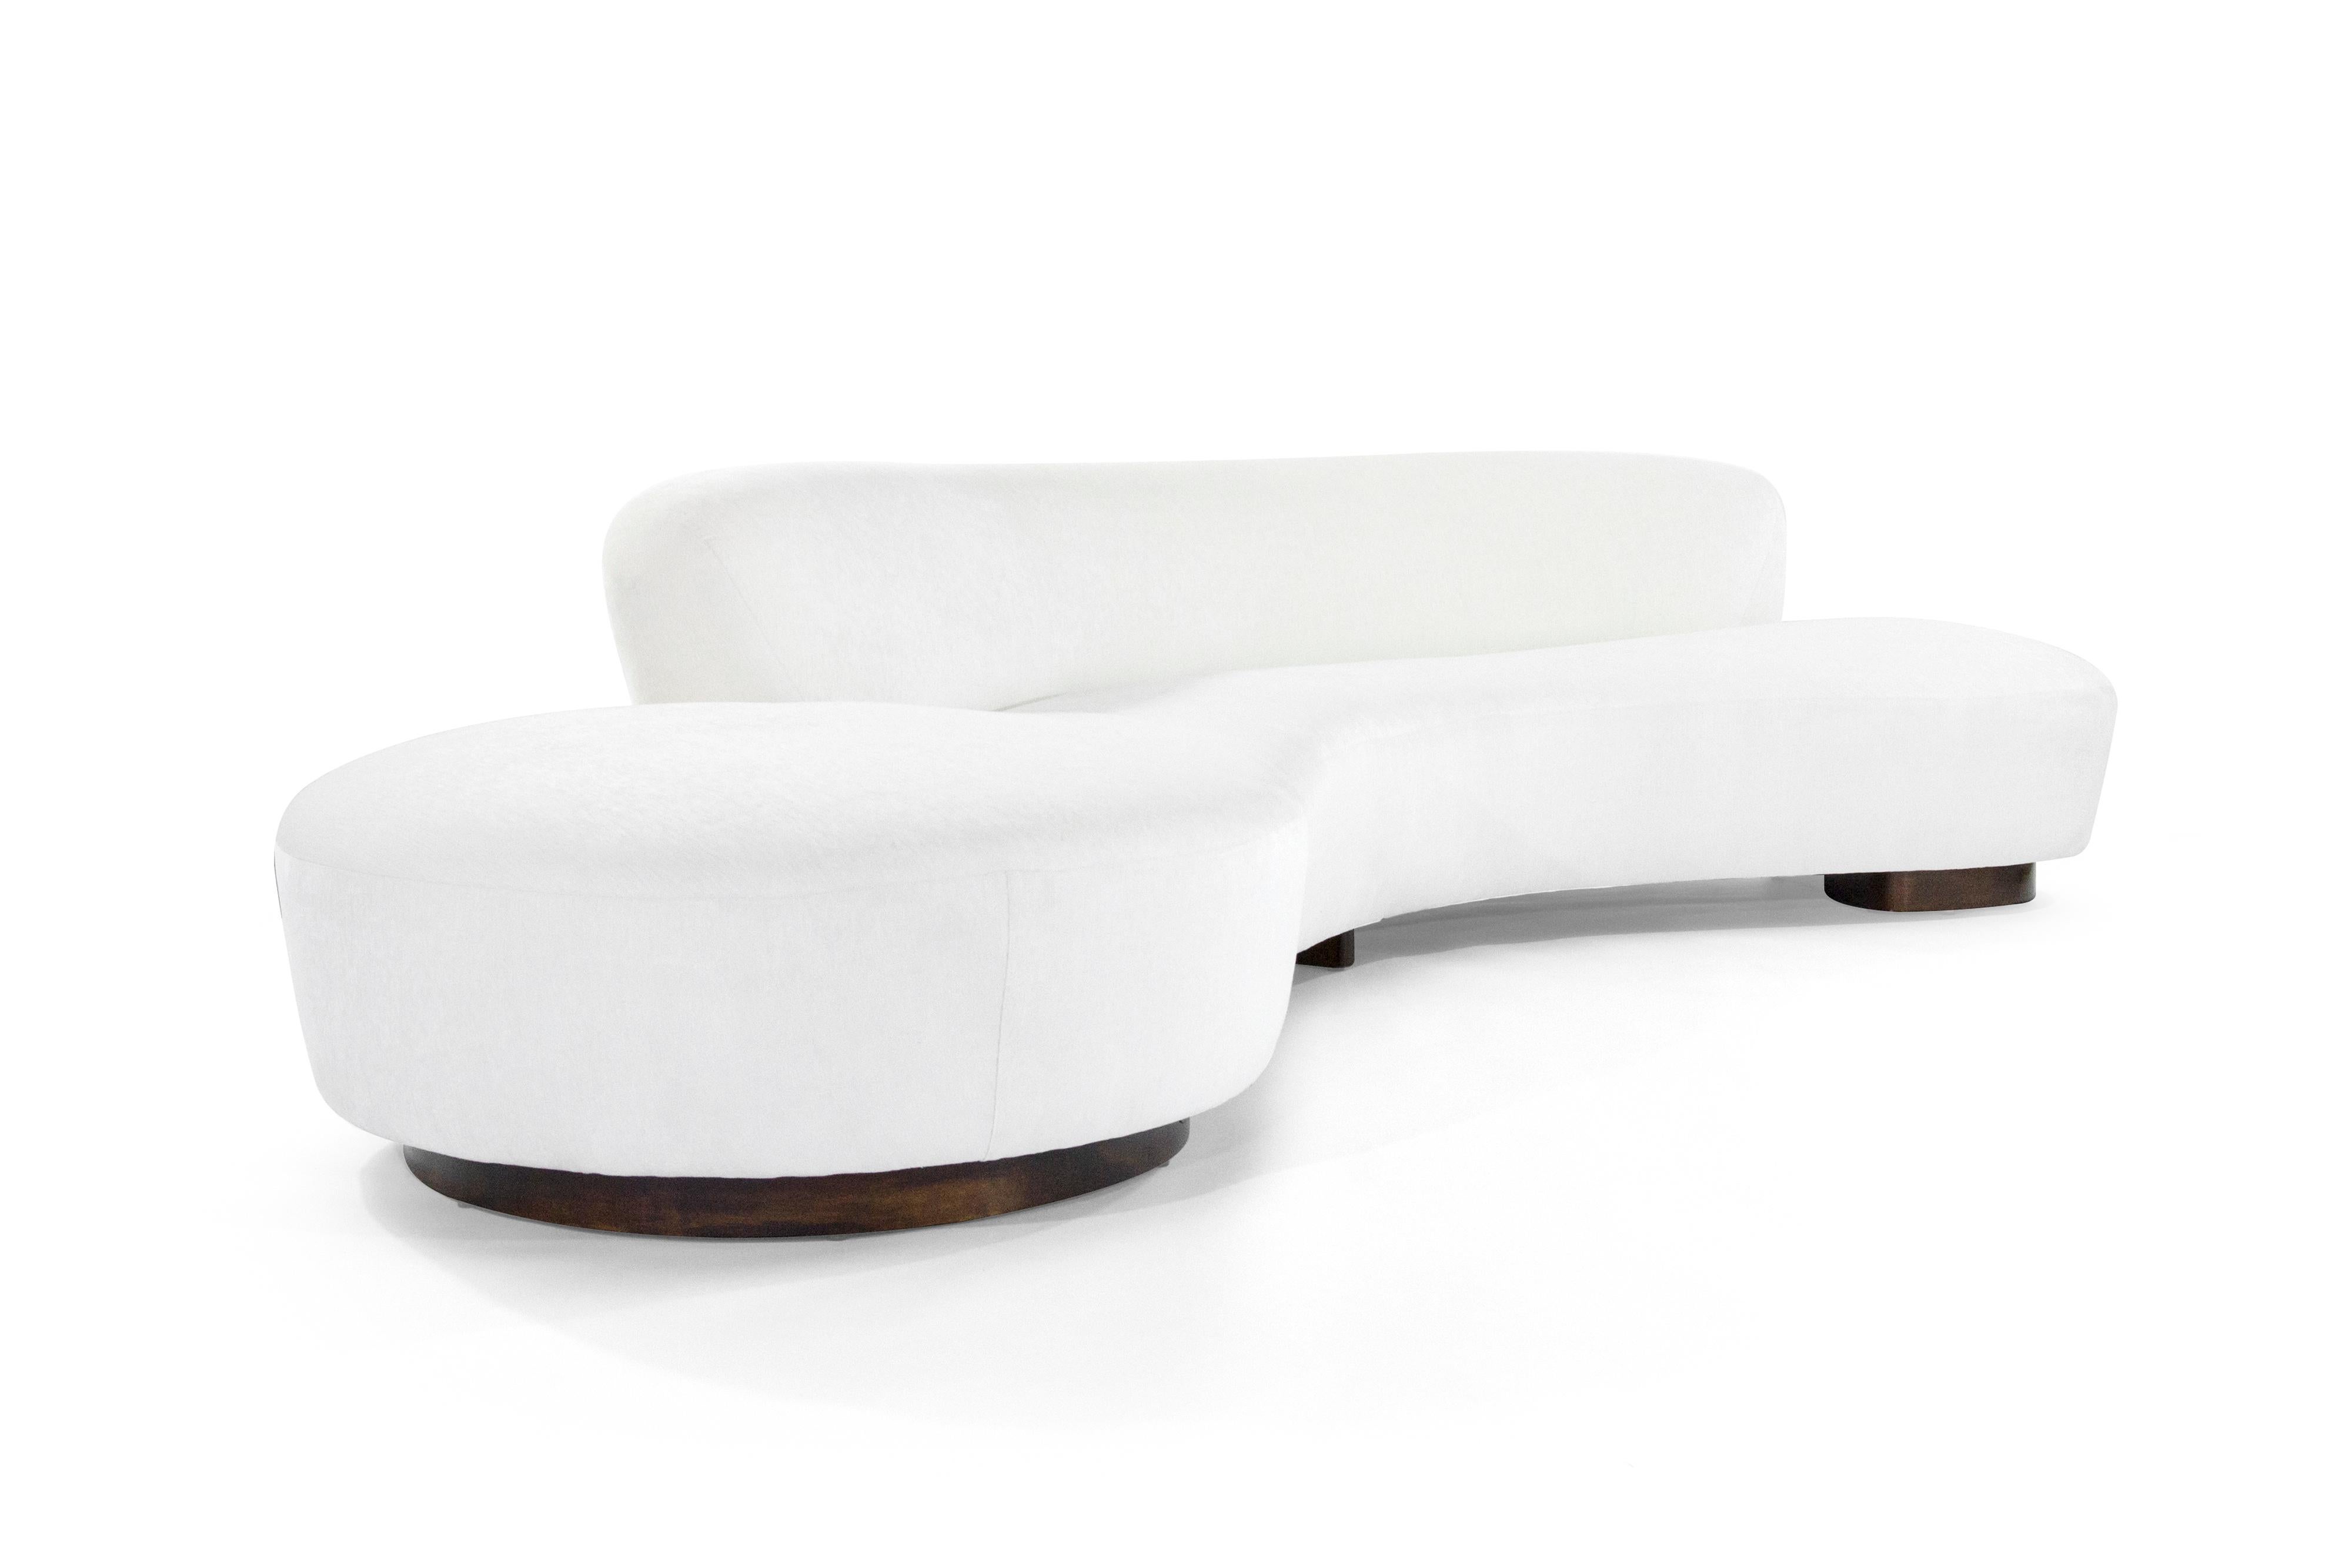 Extremely rare large-scale serpentine sofa by Vladimir Kagan. Fully restored down to its bones, newly upholstered in an off-white soft cotton fabric by Kravet. Maple bases refinished light brown.

 